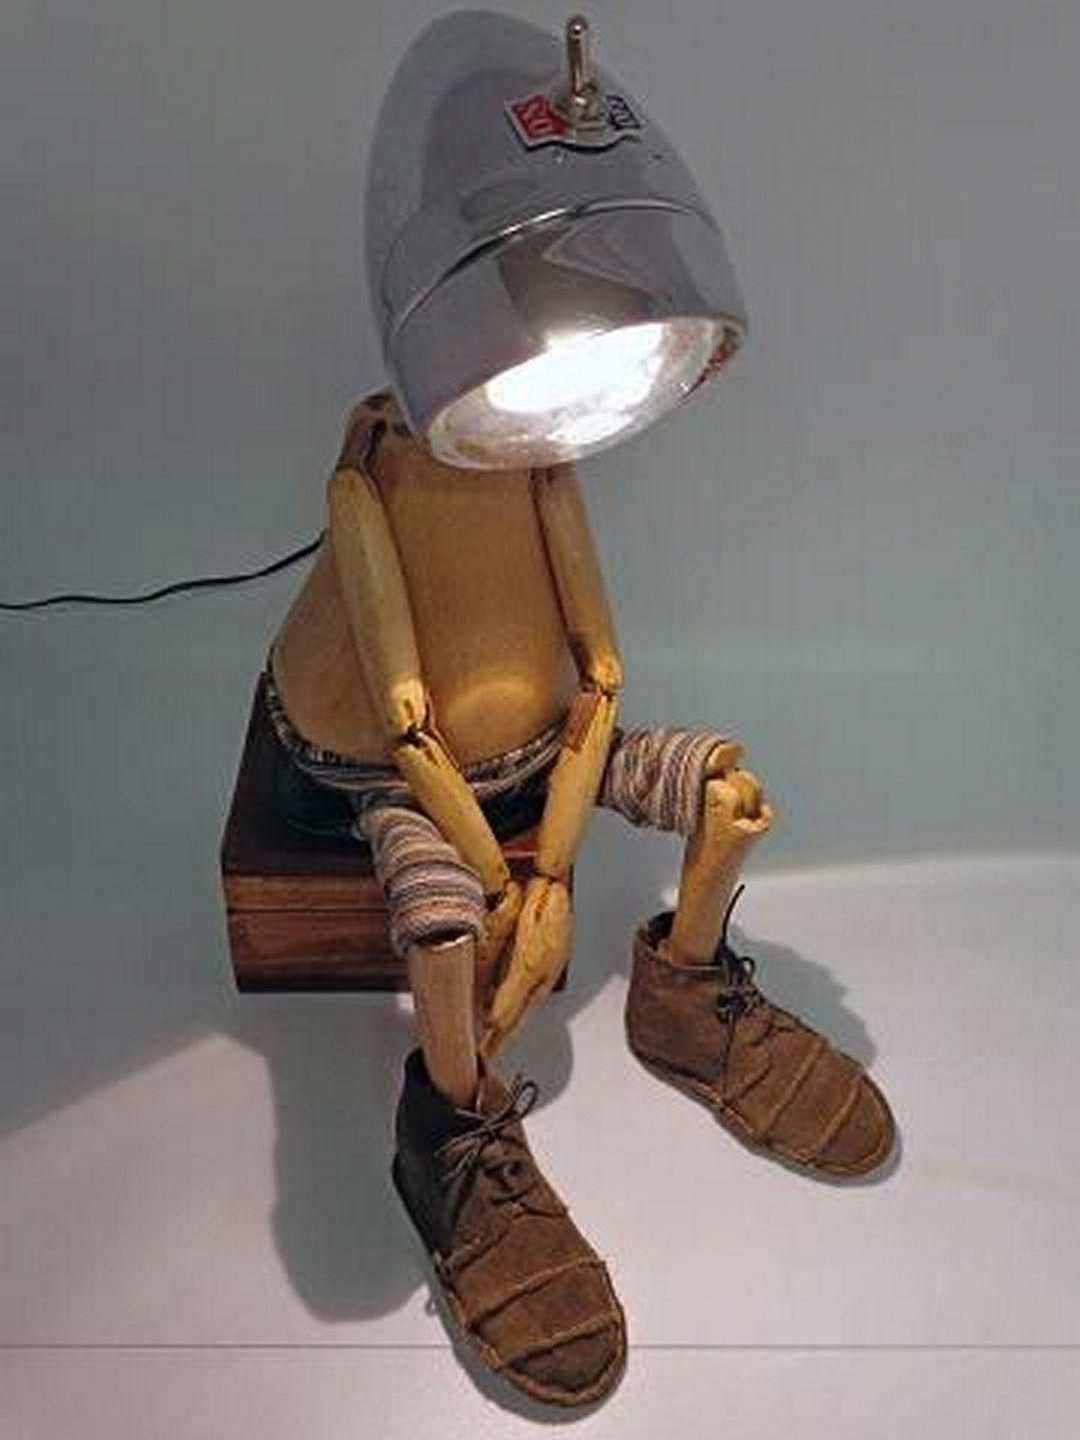 Lamp and puppet